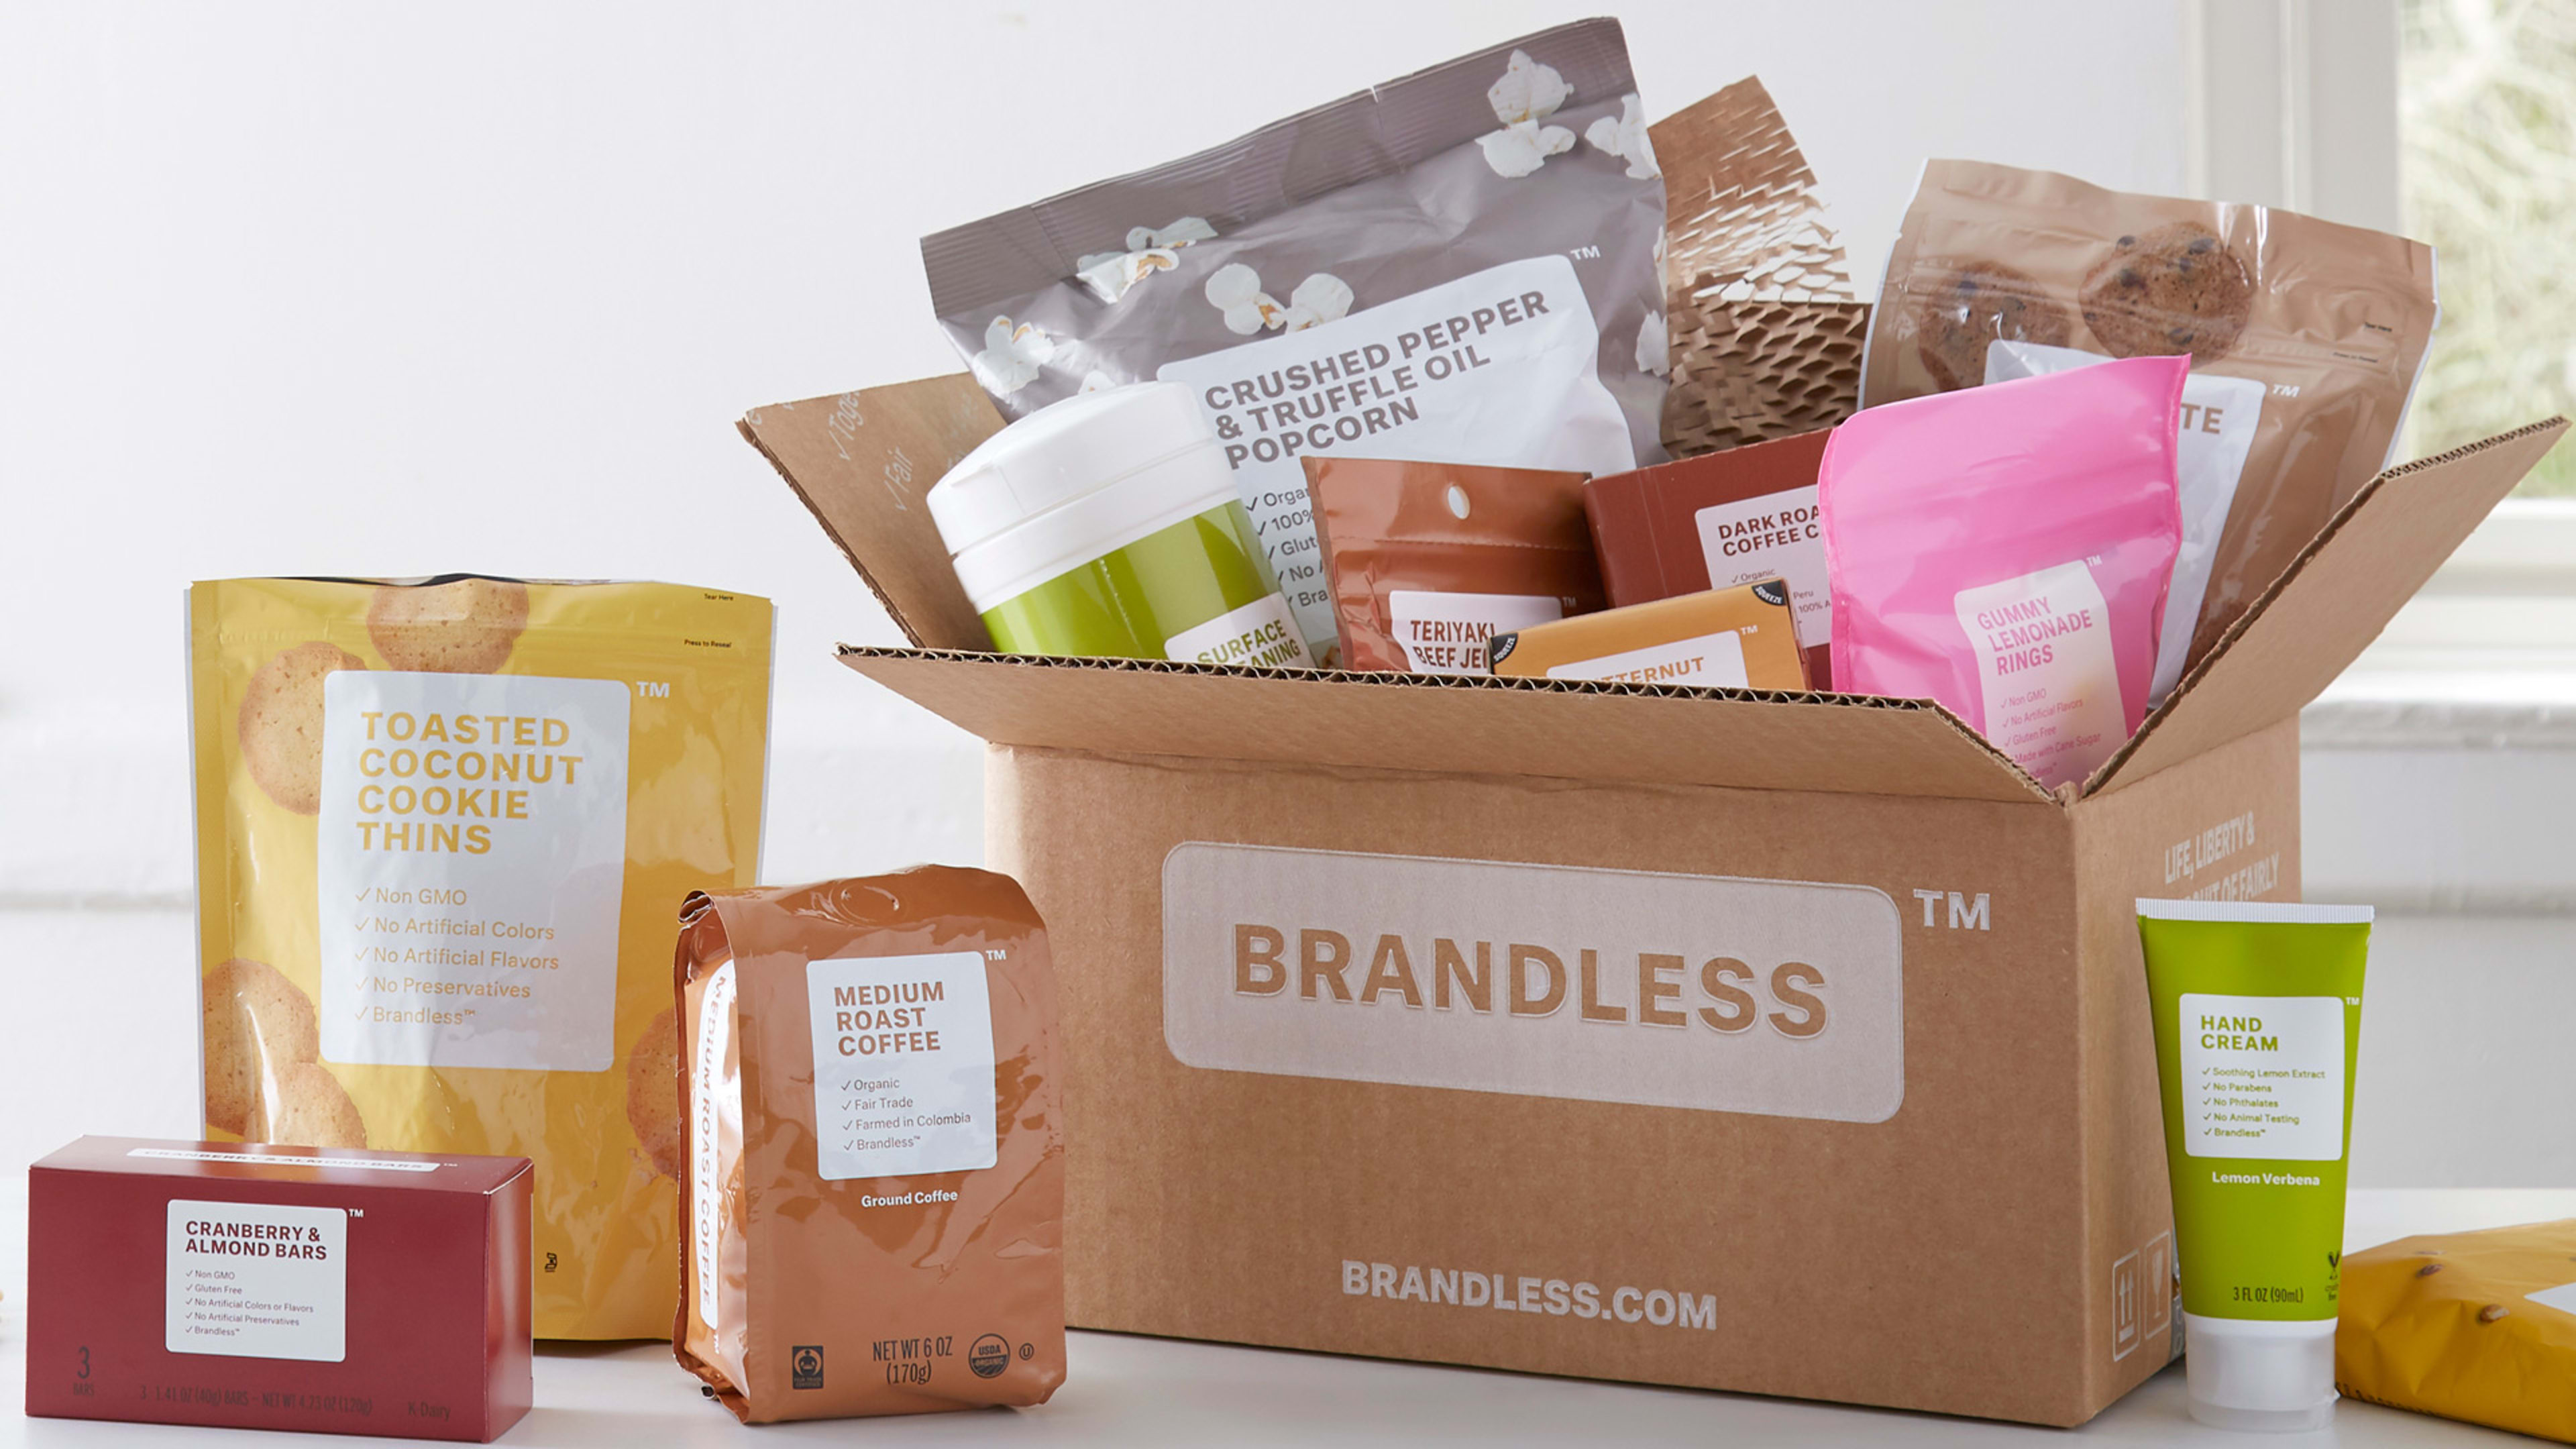 Brandless doesn’t want to sell you products at its new pop-up